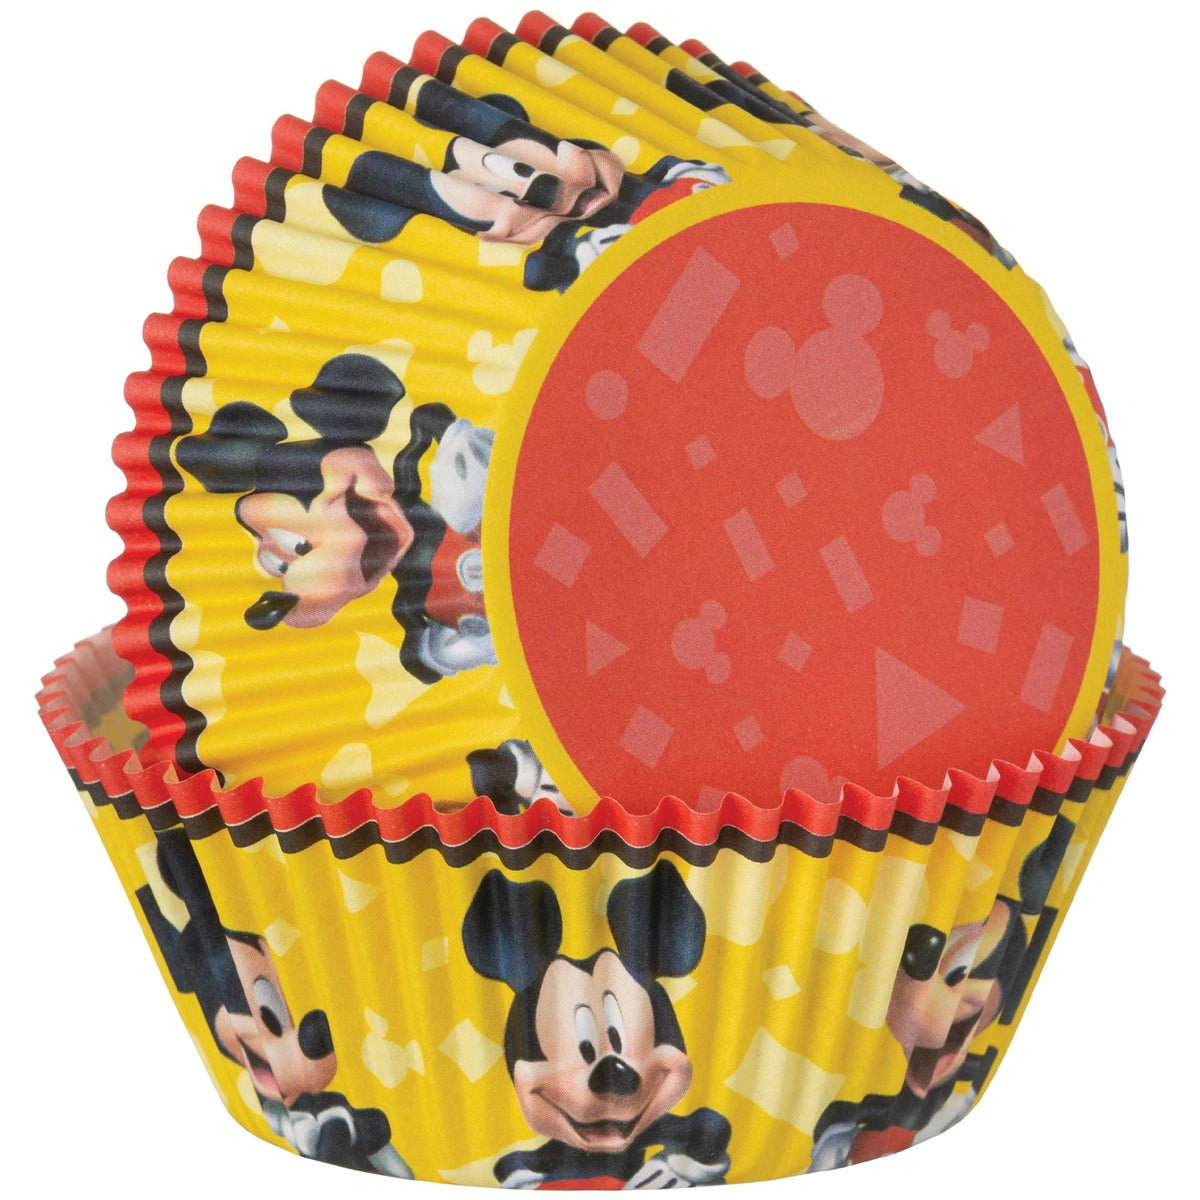 AMSCAN CA Cake Supplies Mickey Mouse Forever Birthday Baking Cups, 48 Count 192937424377